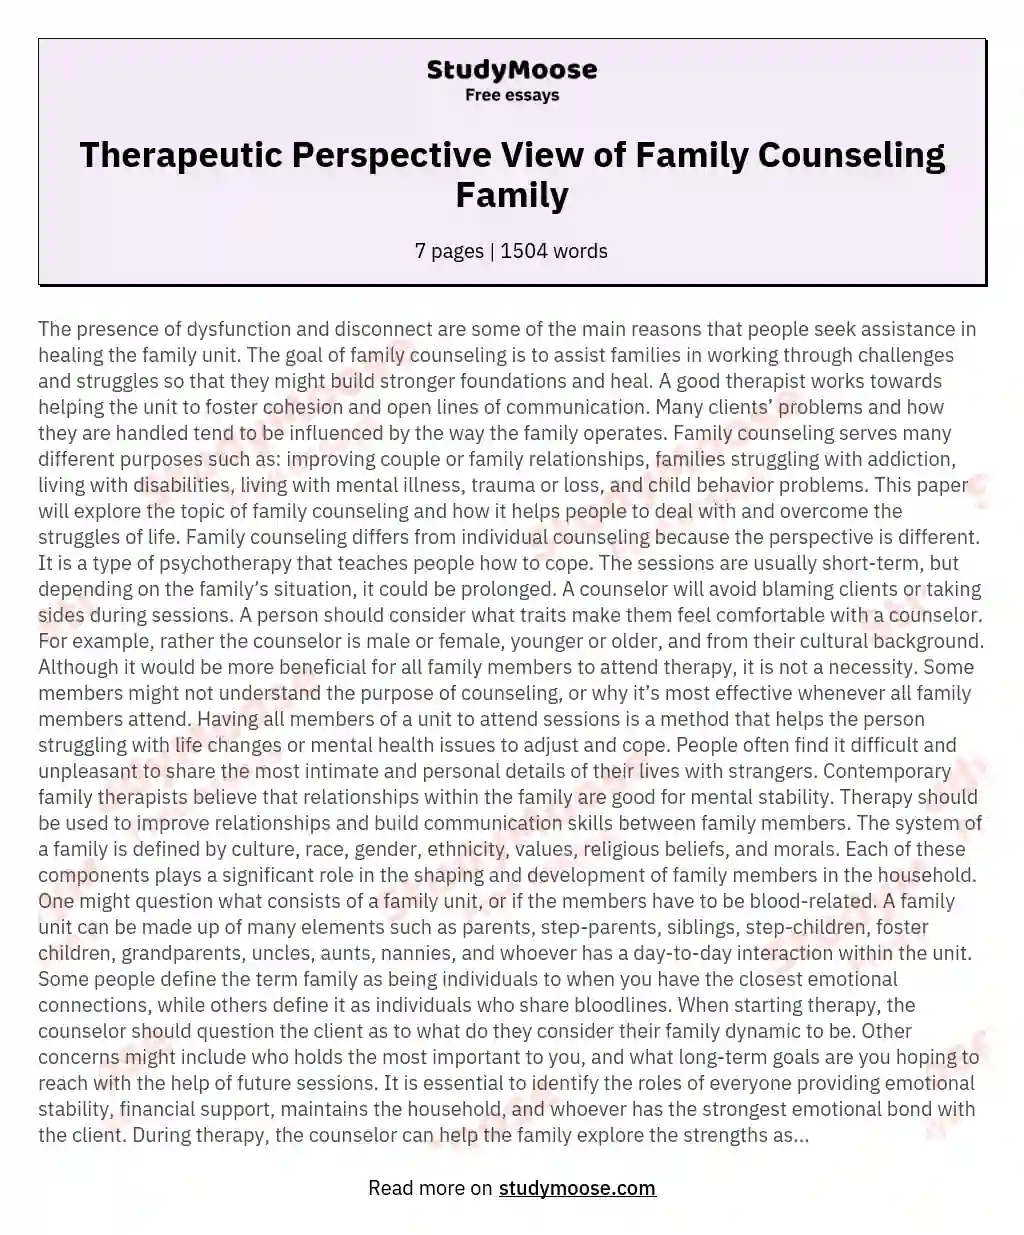 Therapeutic Perspective View of Family Counseling Family essay